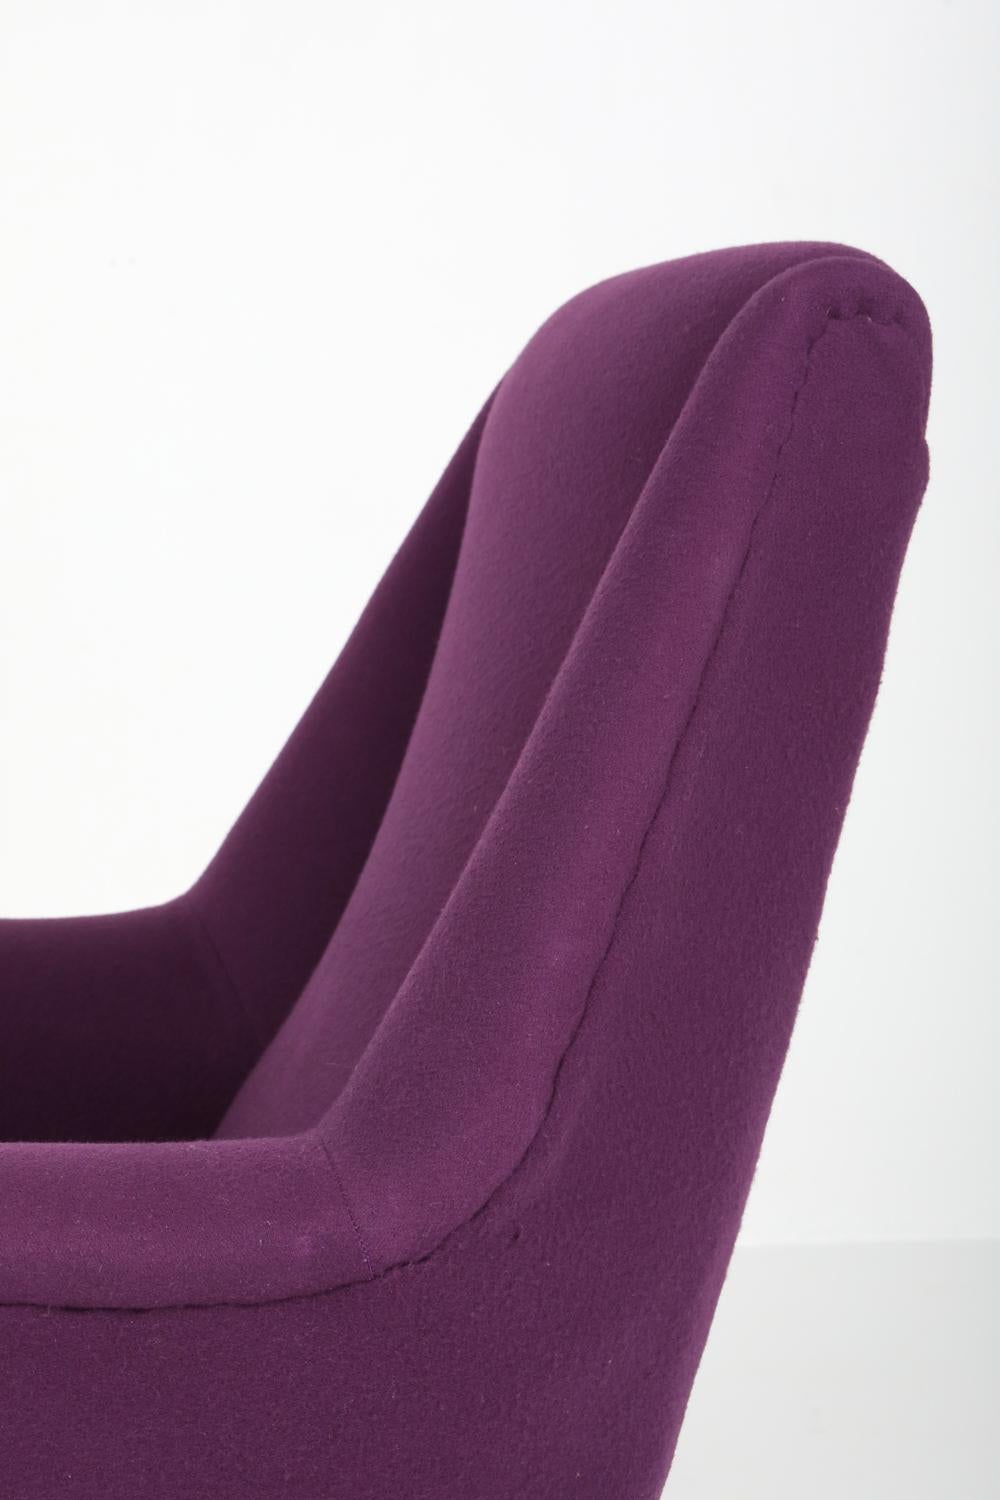 Ico Parisi Easy Chairs with Purple Upholstery 6